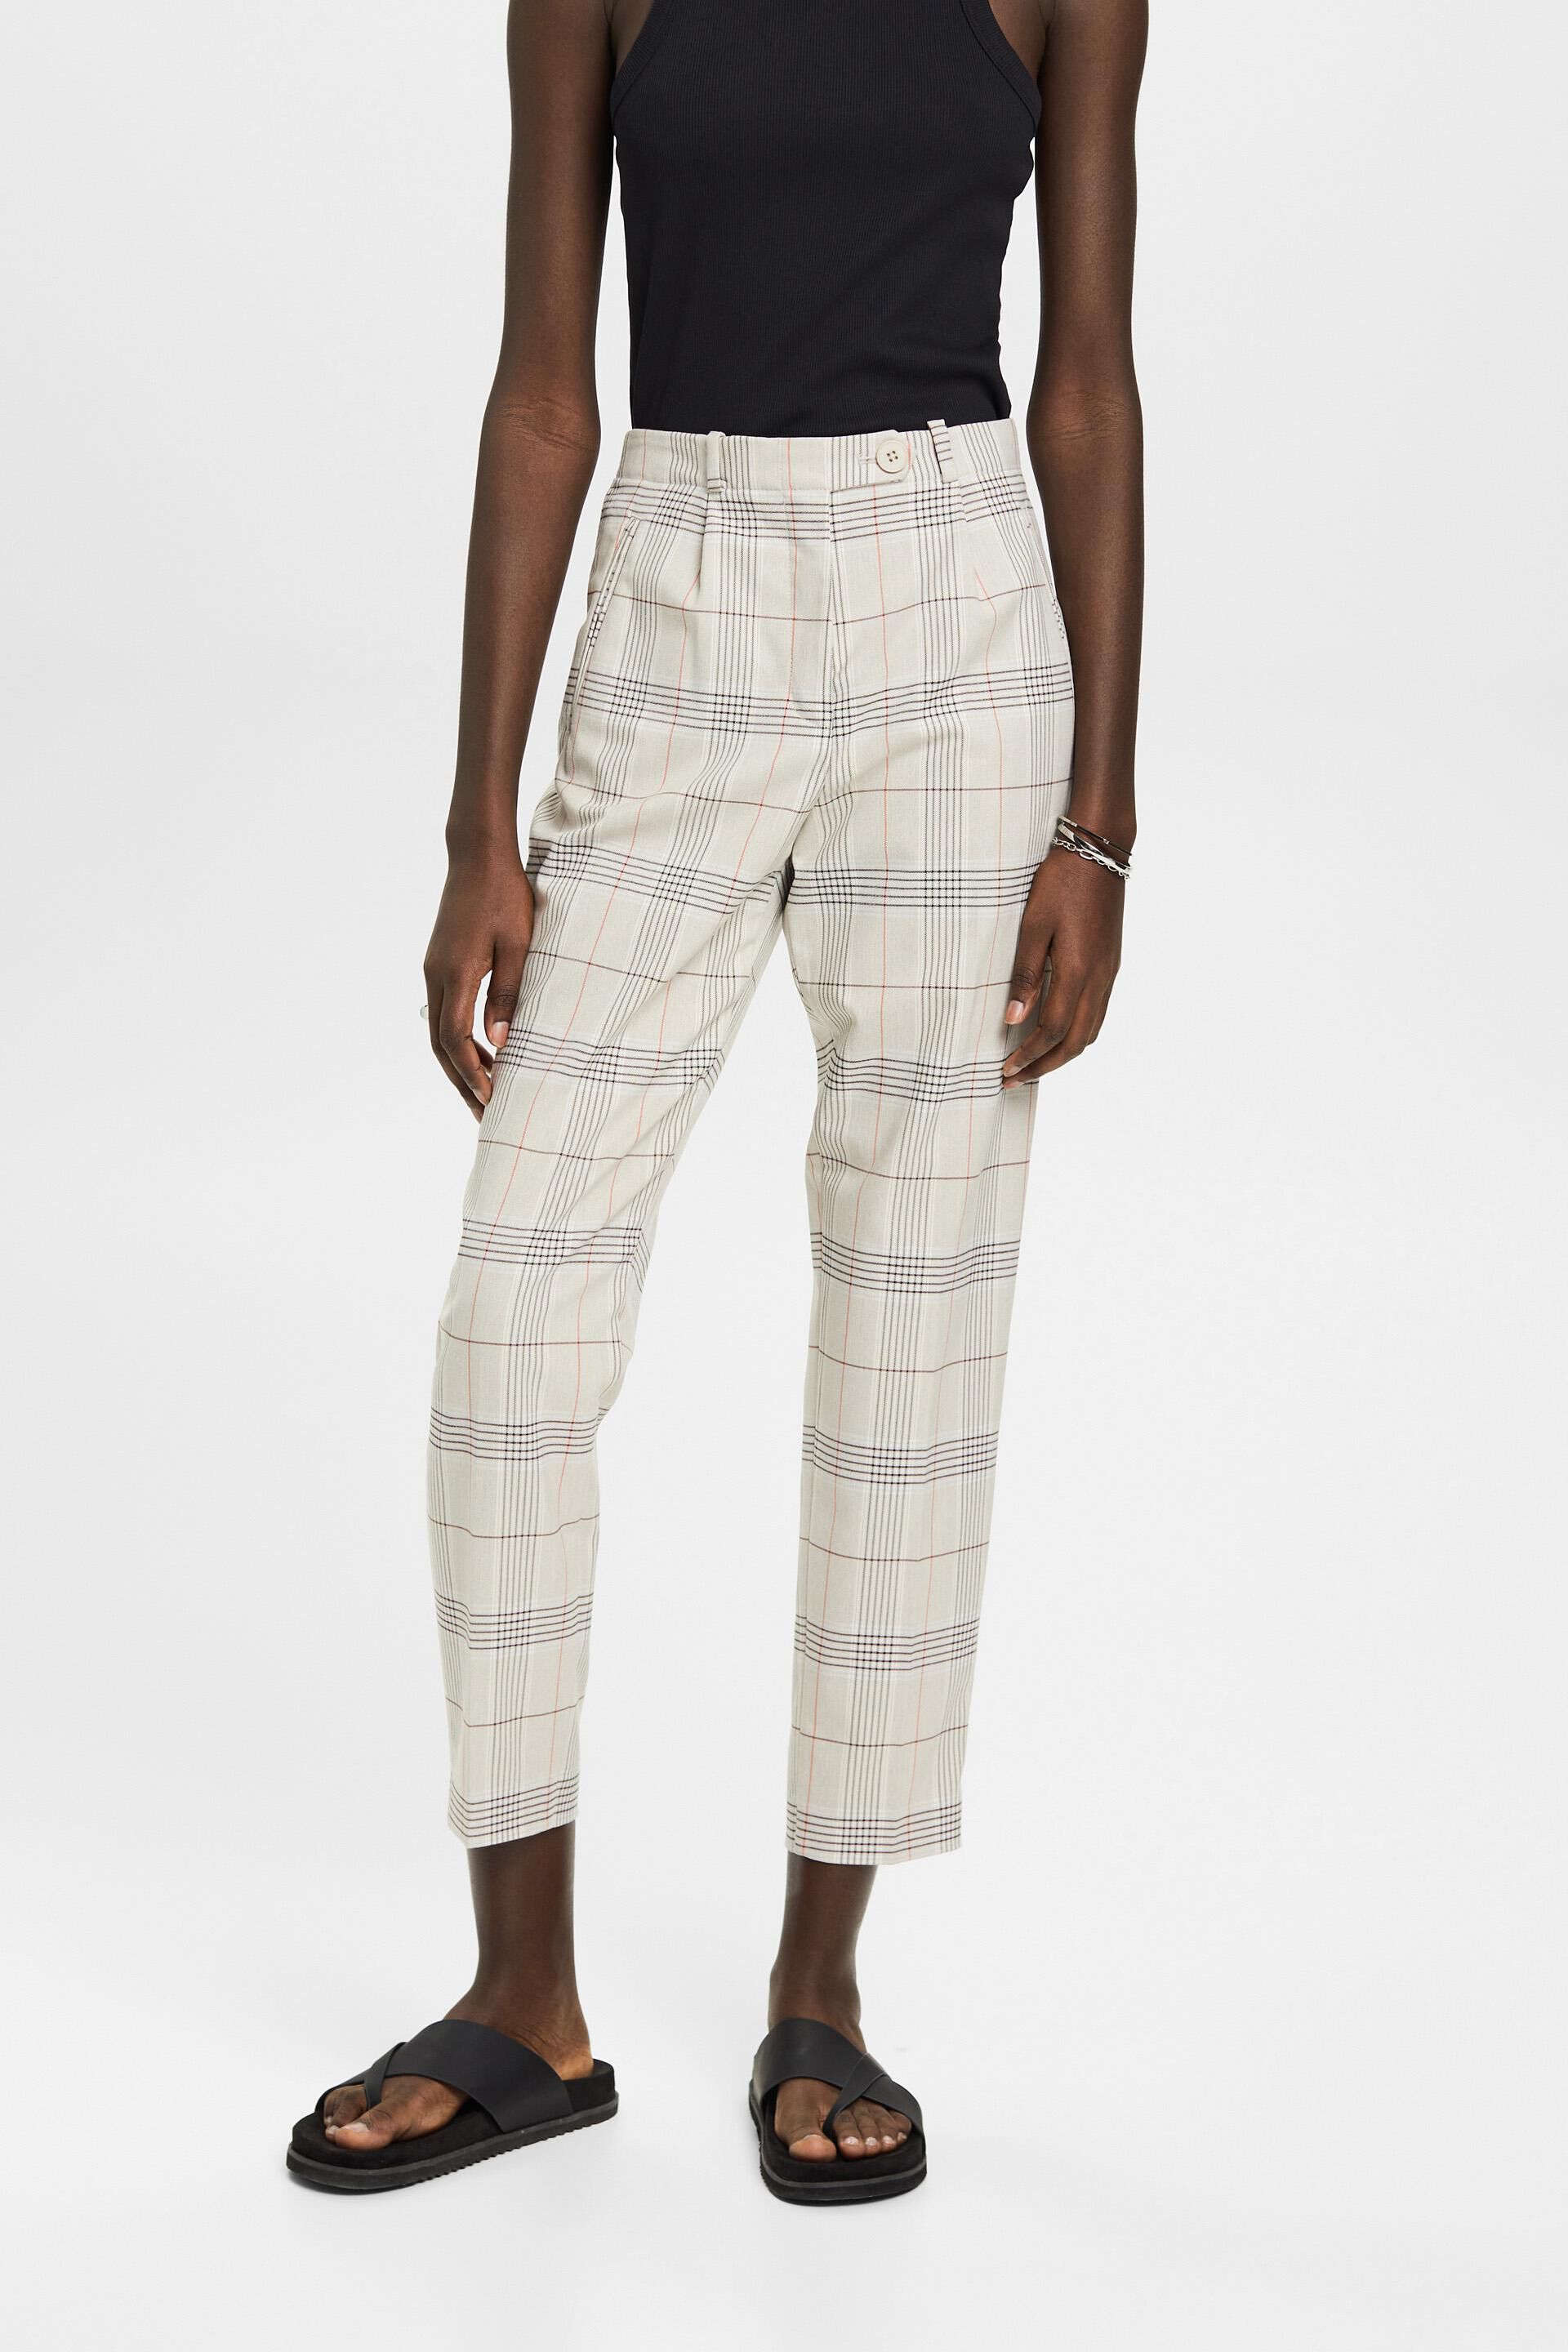 Slim Fit Cropped trousers - Black/Beige checked - Men | H&M